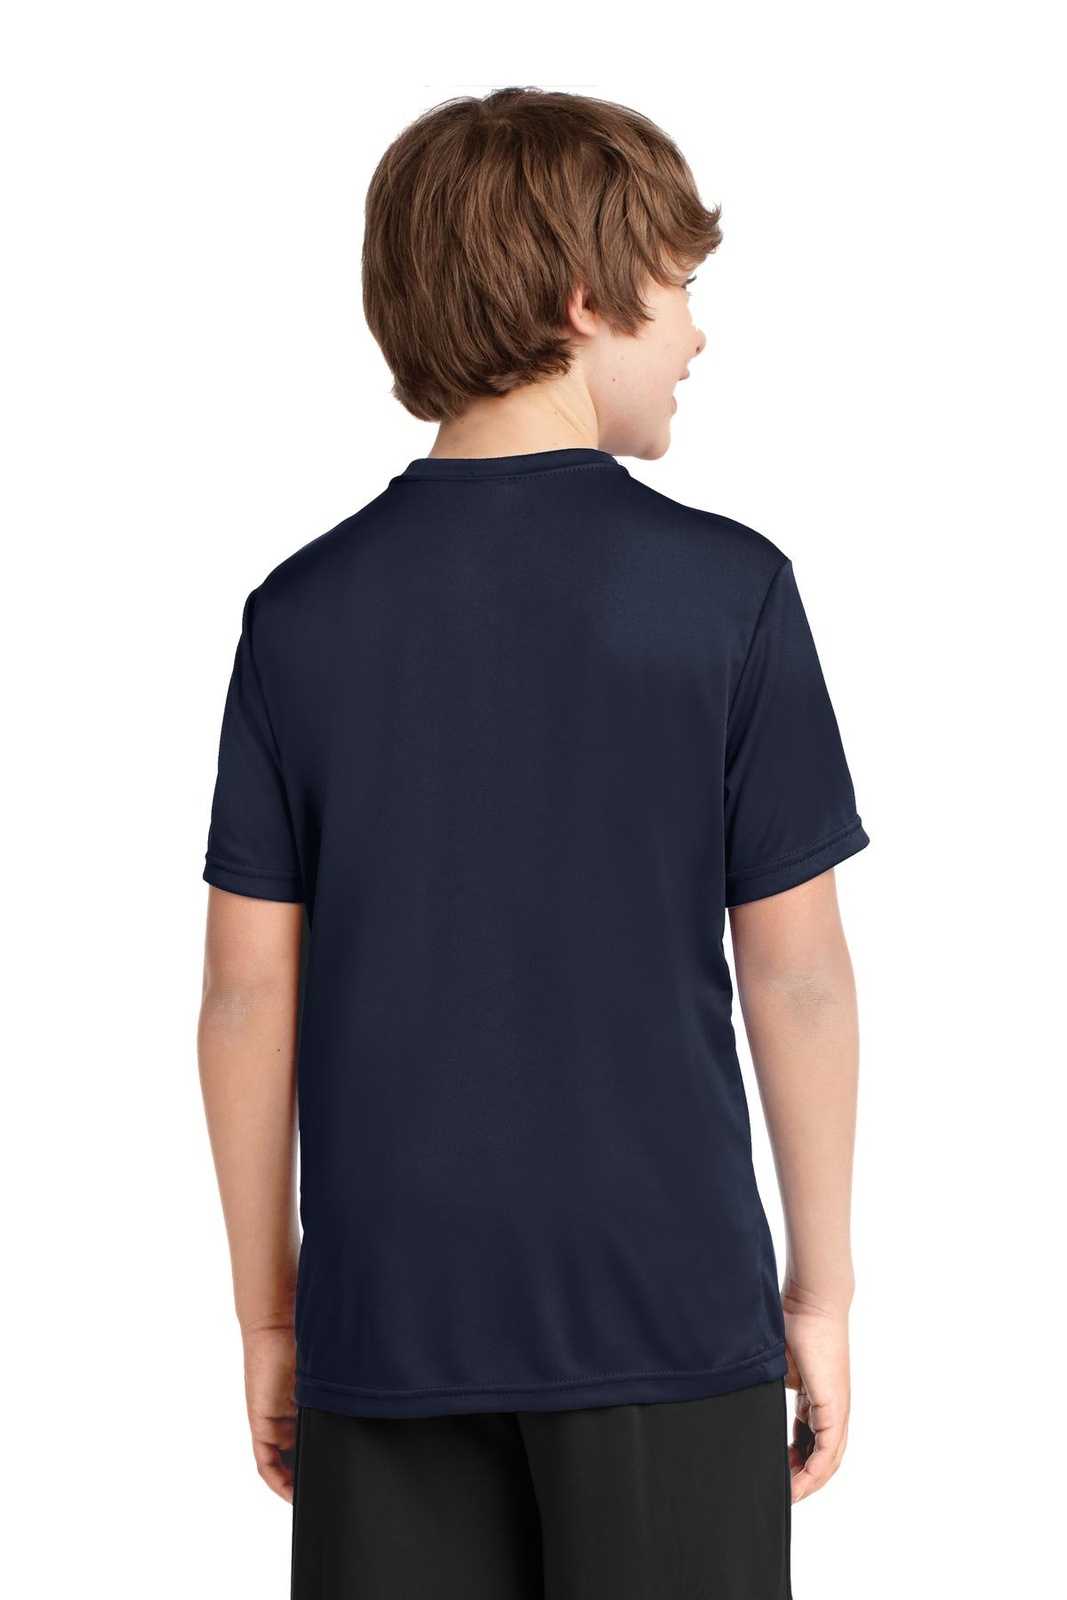 Port & Company PC380Y Youth Performance Tee - Deep Navy - HIT a Double - 1